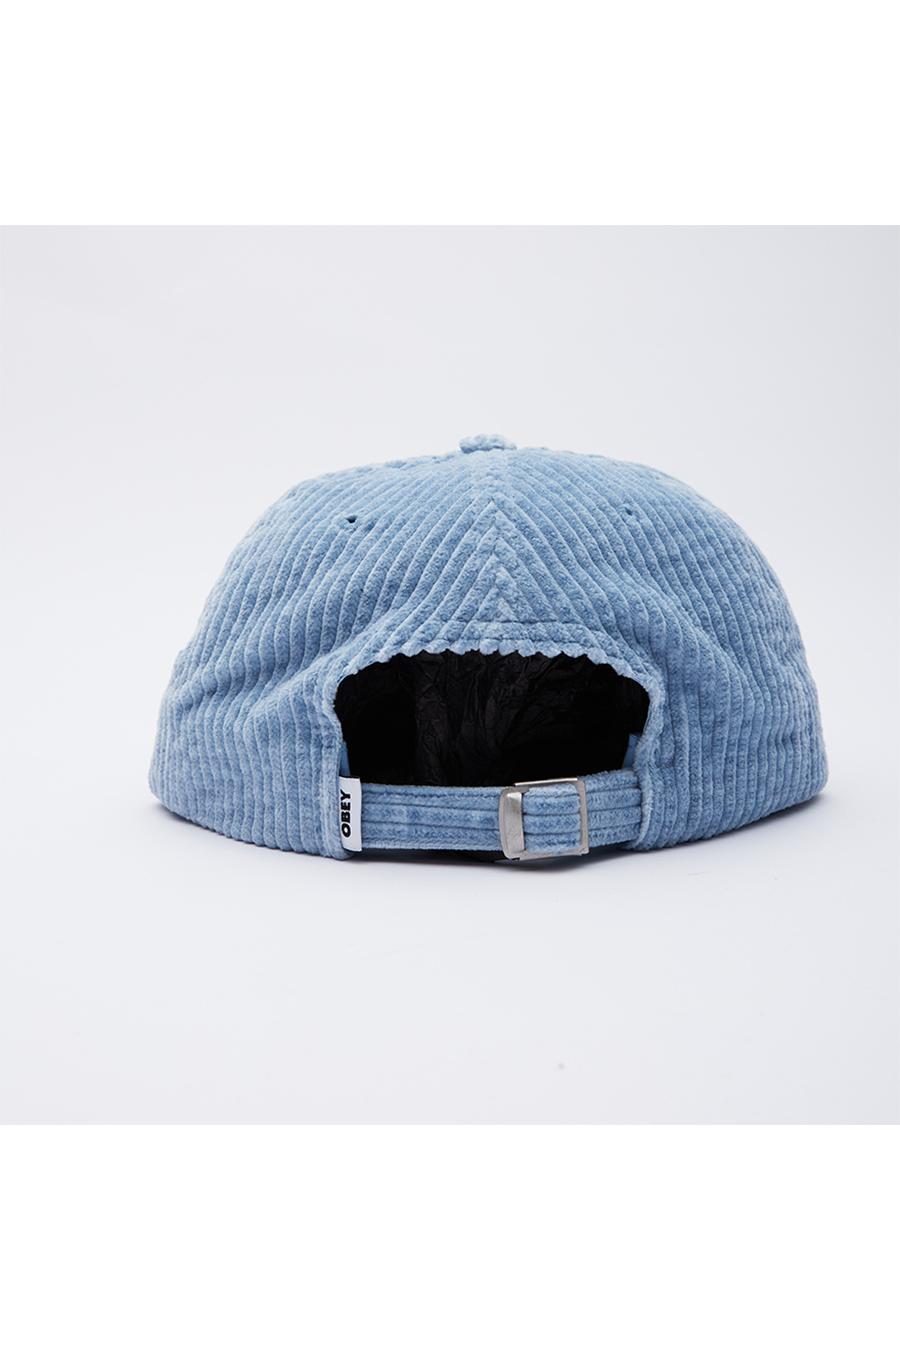 Bold Cord Strapback | Ice Blue - Main Image Number 2 of 2